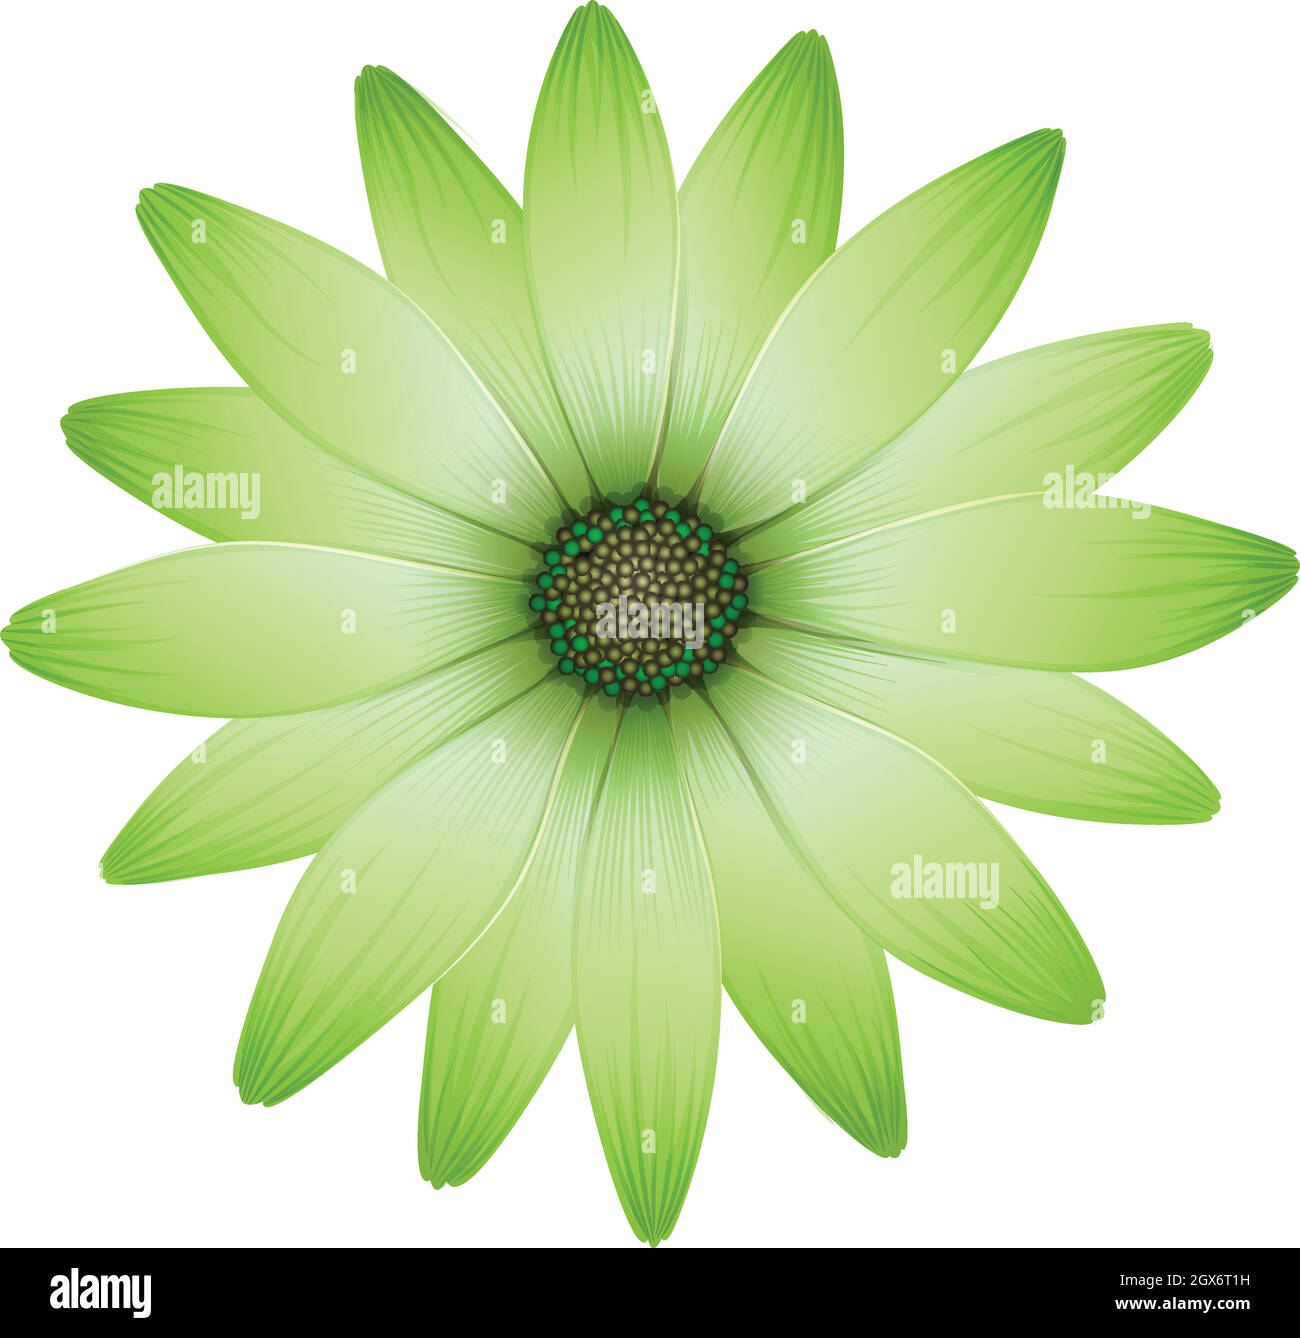 A flower with green petals Stock Vector